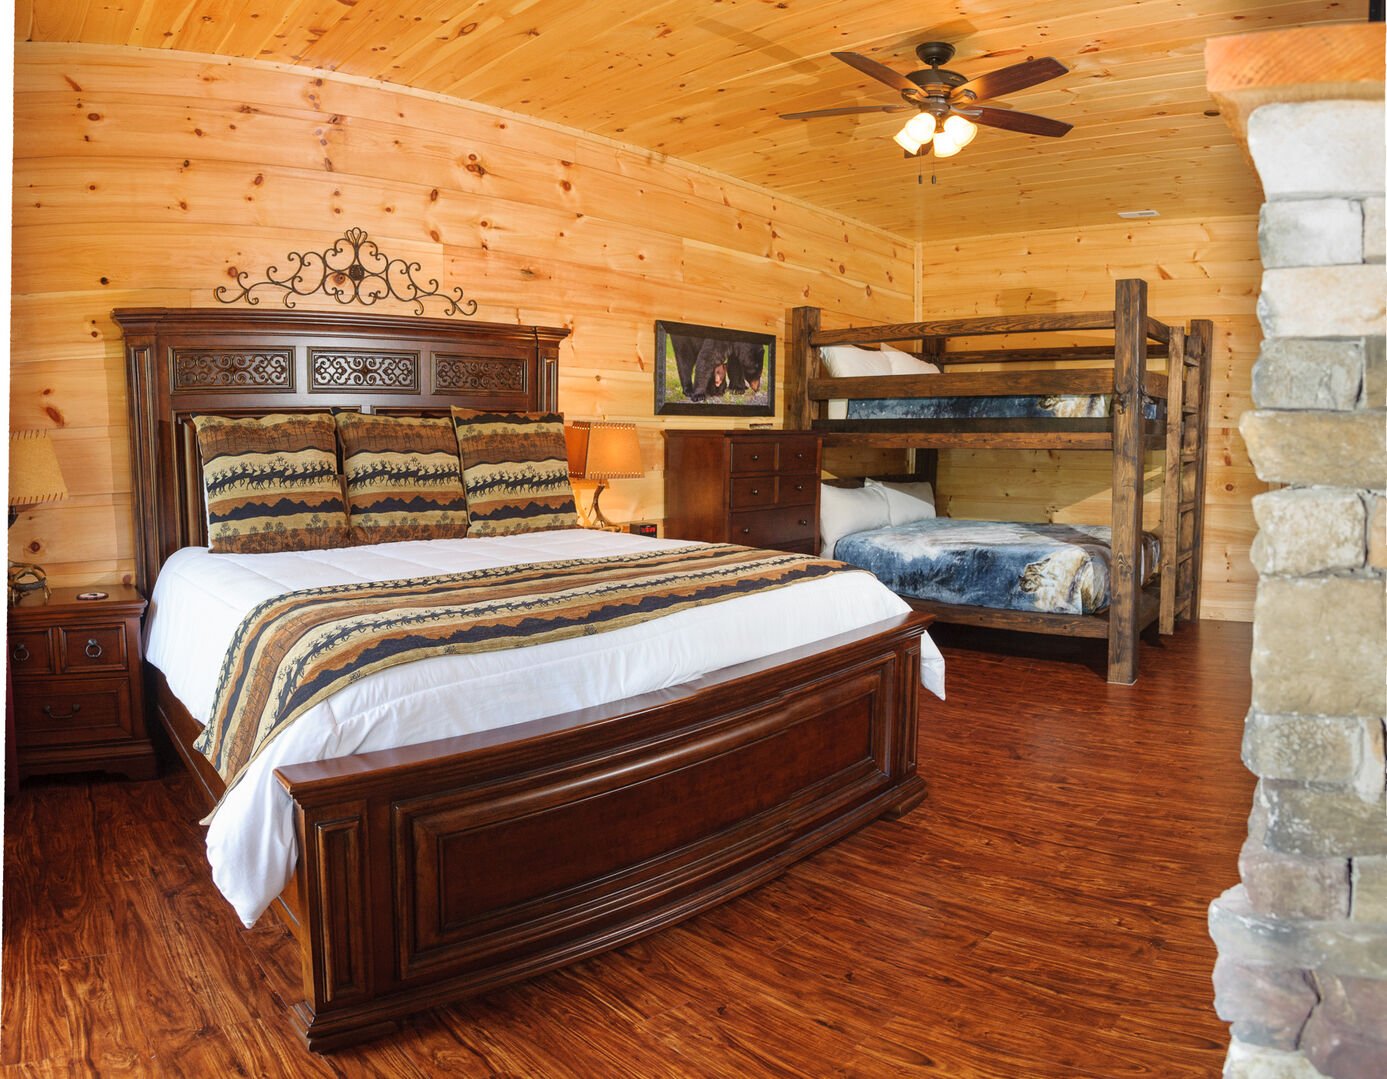 Large Bed, Dresser, Bunk Bed, Nightstands, and Lamps.